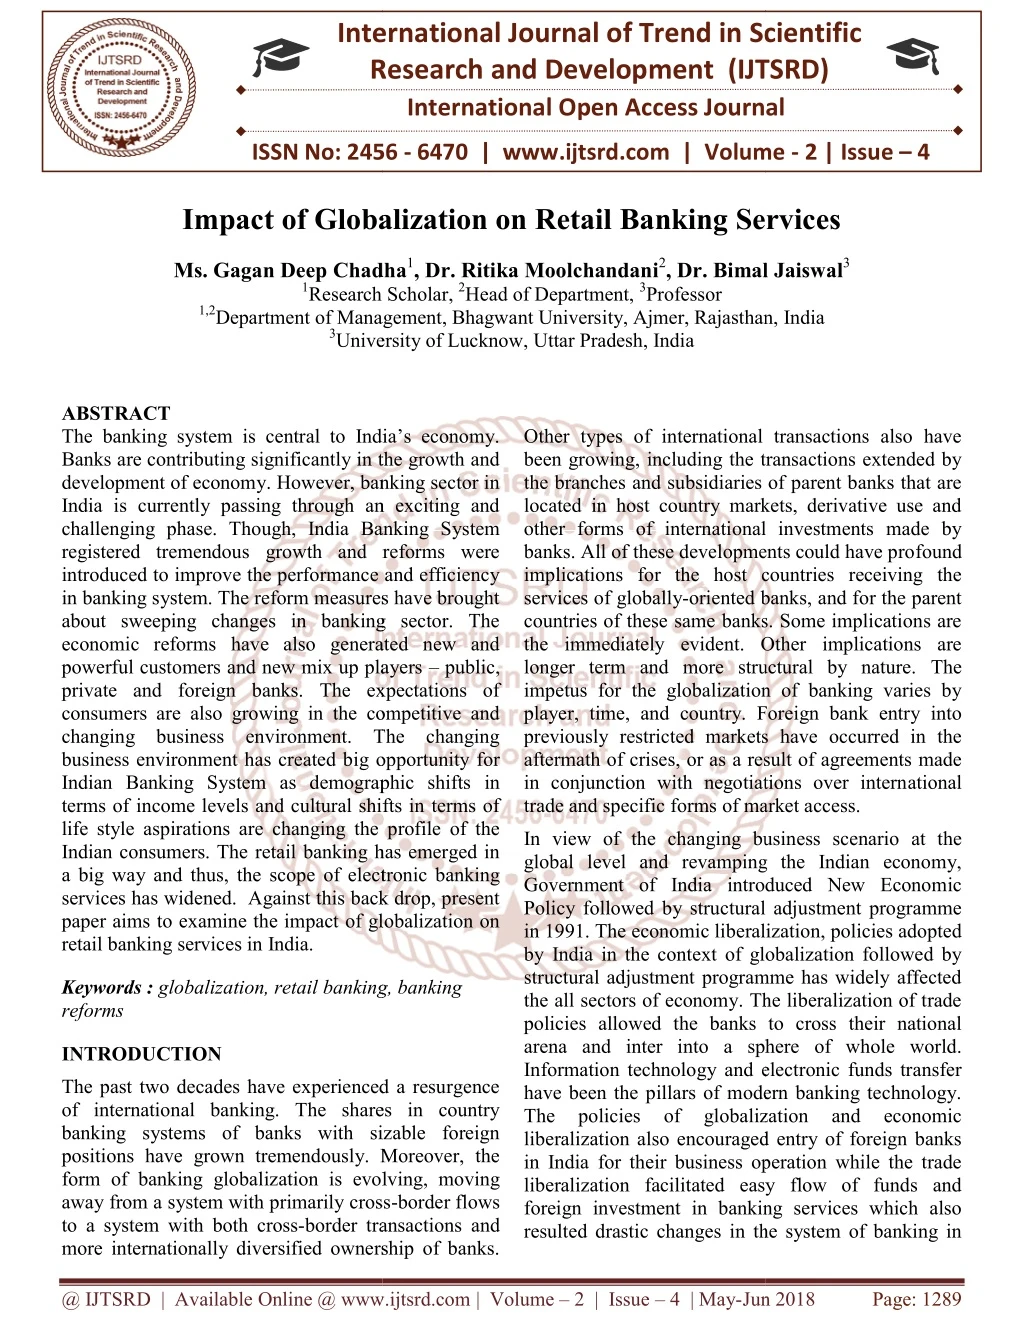 Impact of Globalization on Retail Banking Services